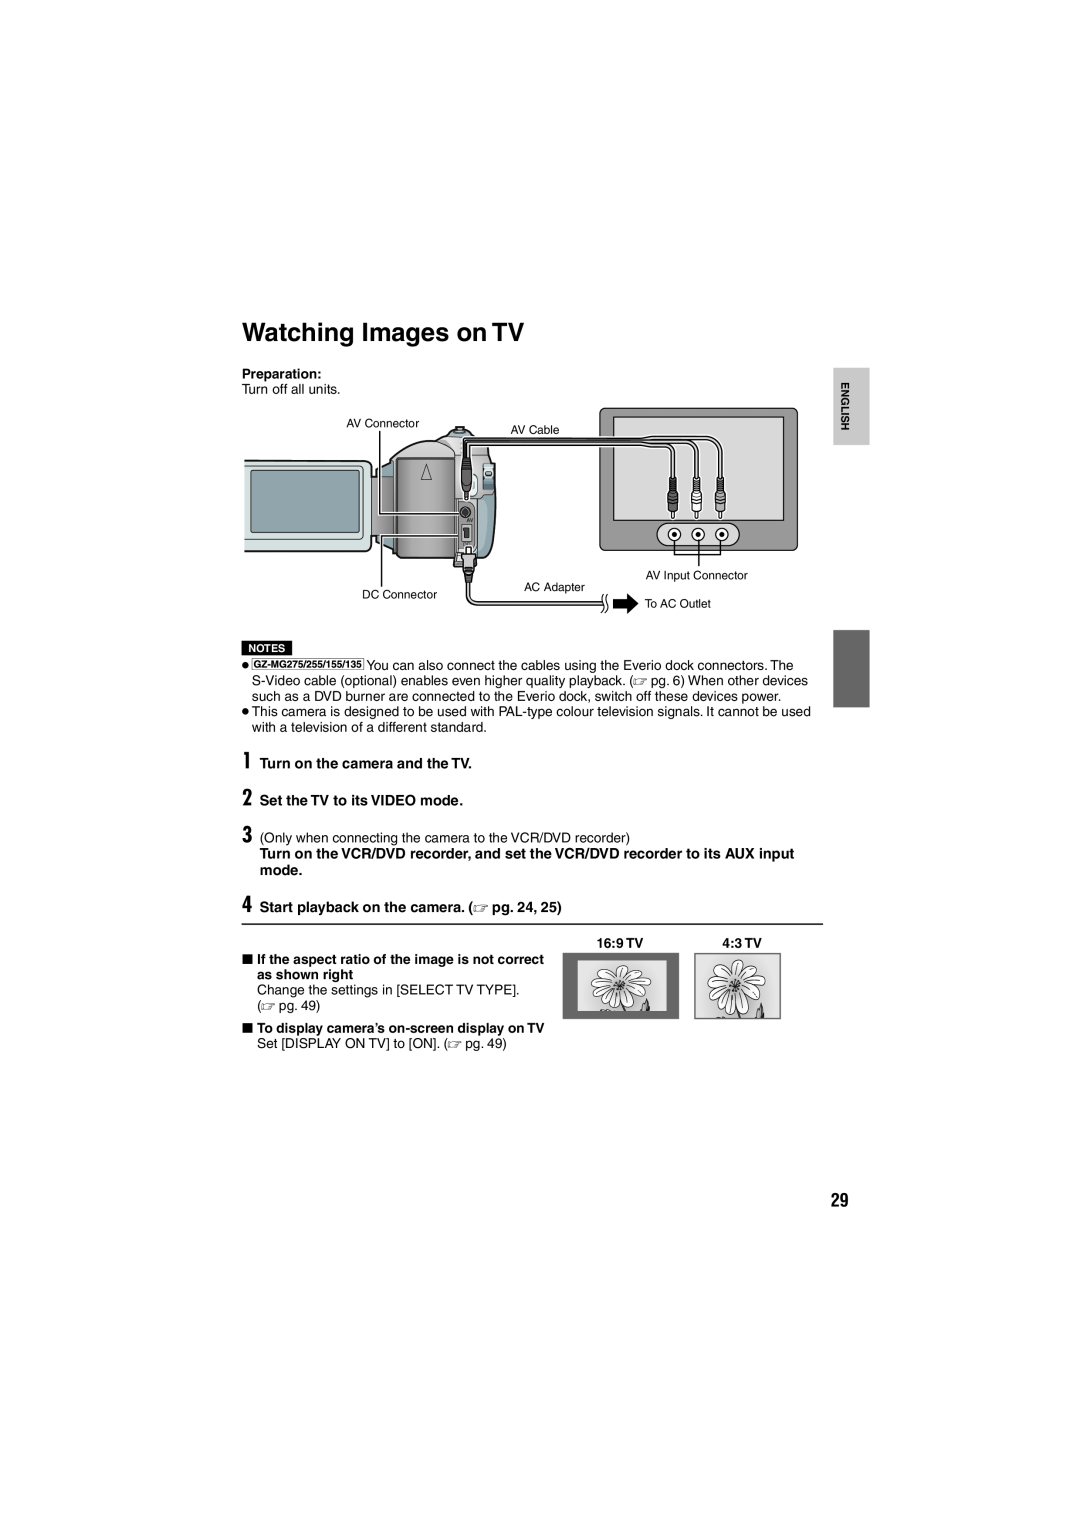 JVC GZ-MG275E/EK Watching Images on TV, Turn on the camera and the TV 2 Set the TV to its VIDEO mode, Preparation, 169 TV 